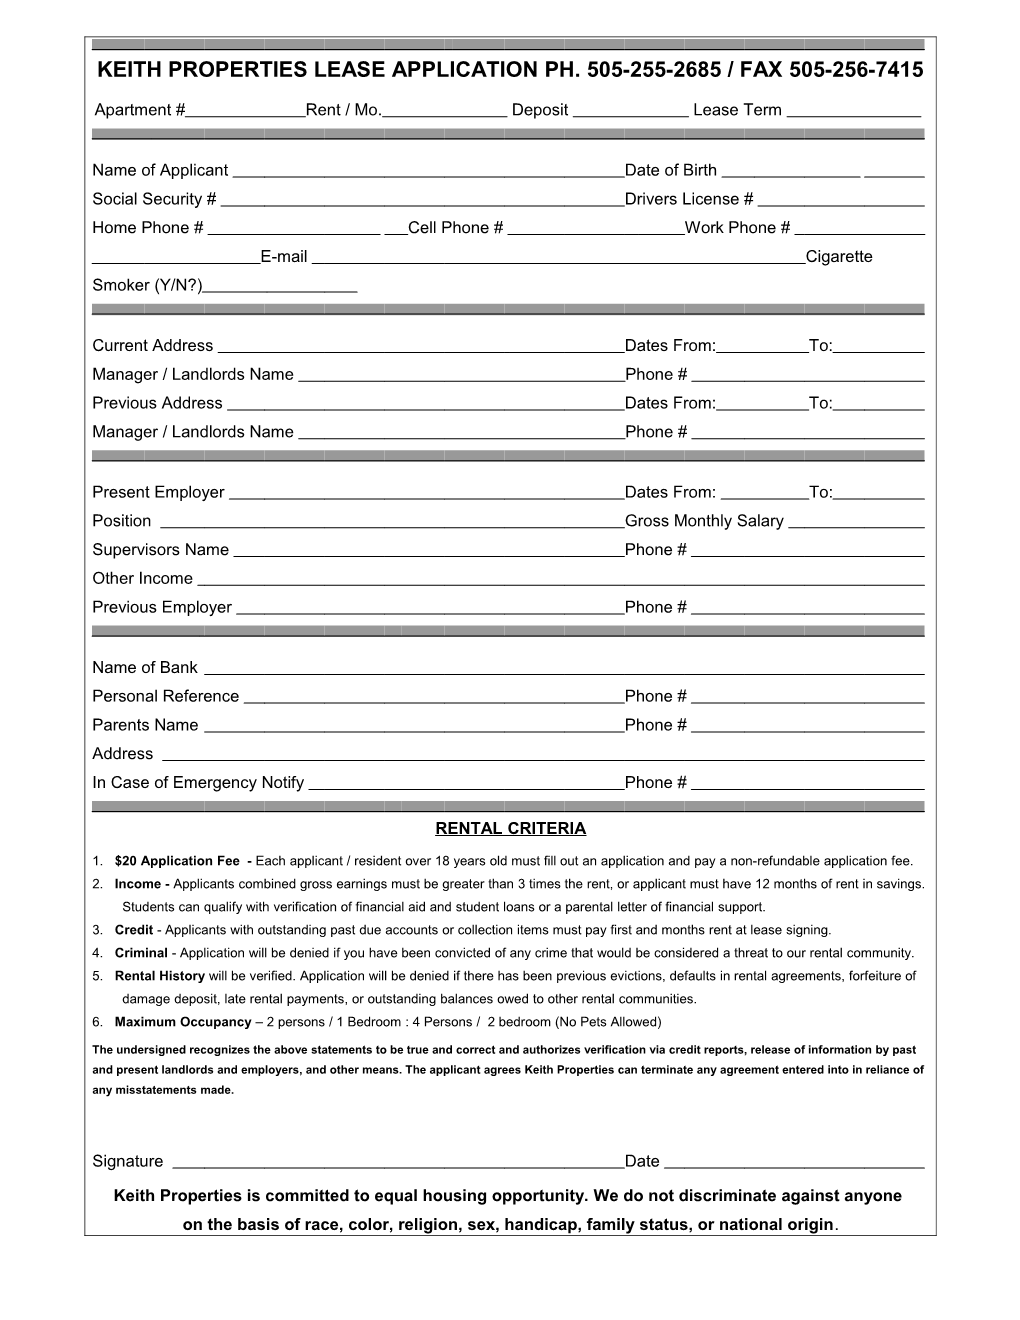 Keith Properties Lease Application Ph. 505-255-2685 / Fax 505-256-7415